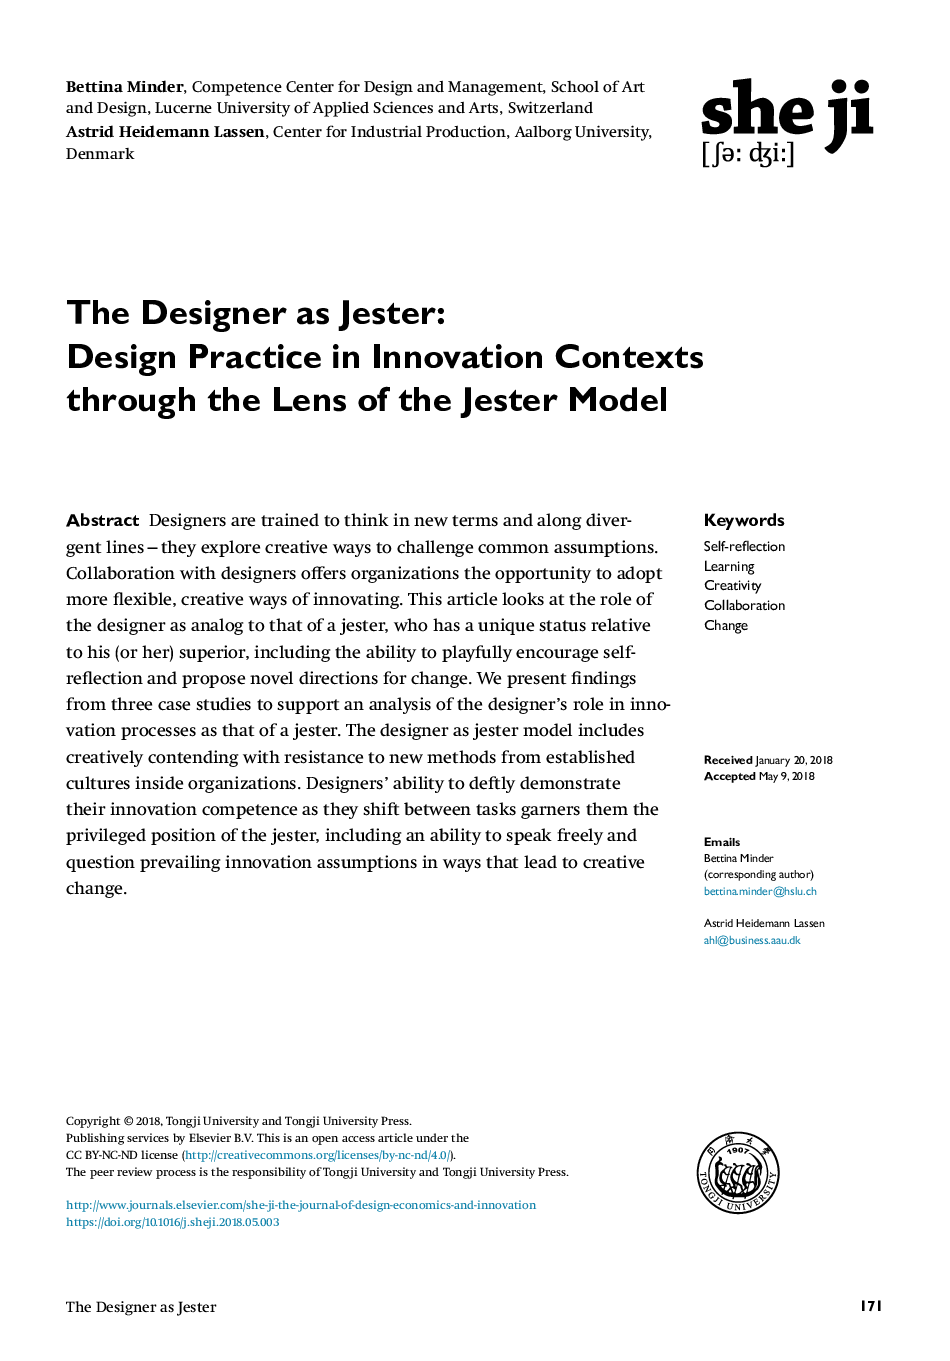 The Designer as Jester: Design Practice in Innovation Contexts through the Lens of the Jester Model